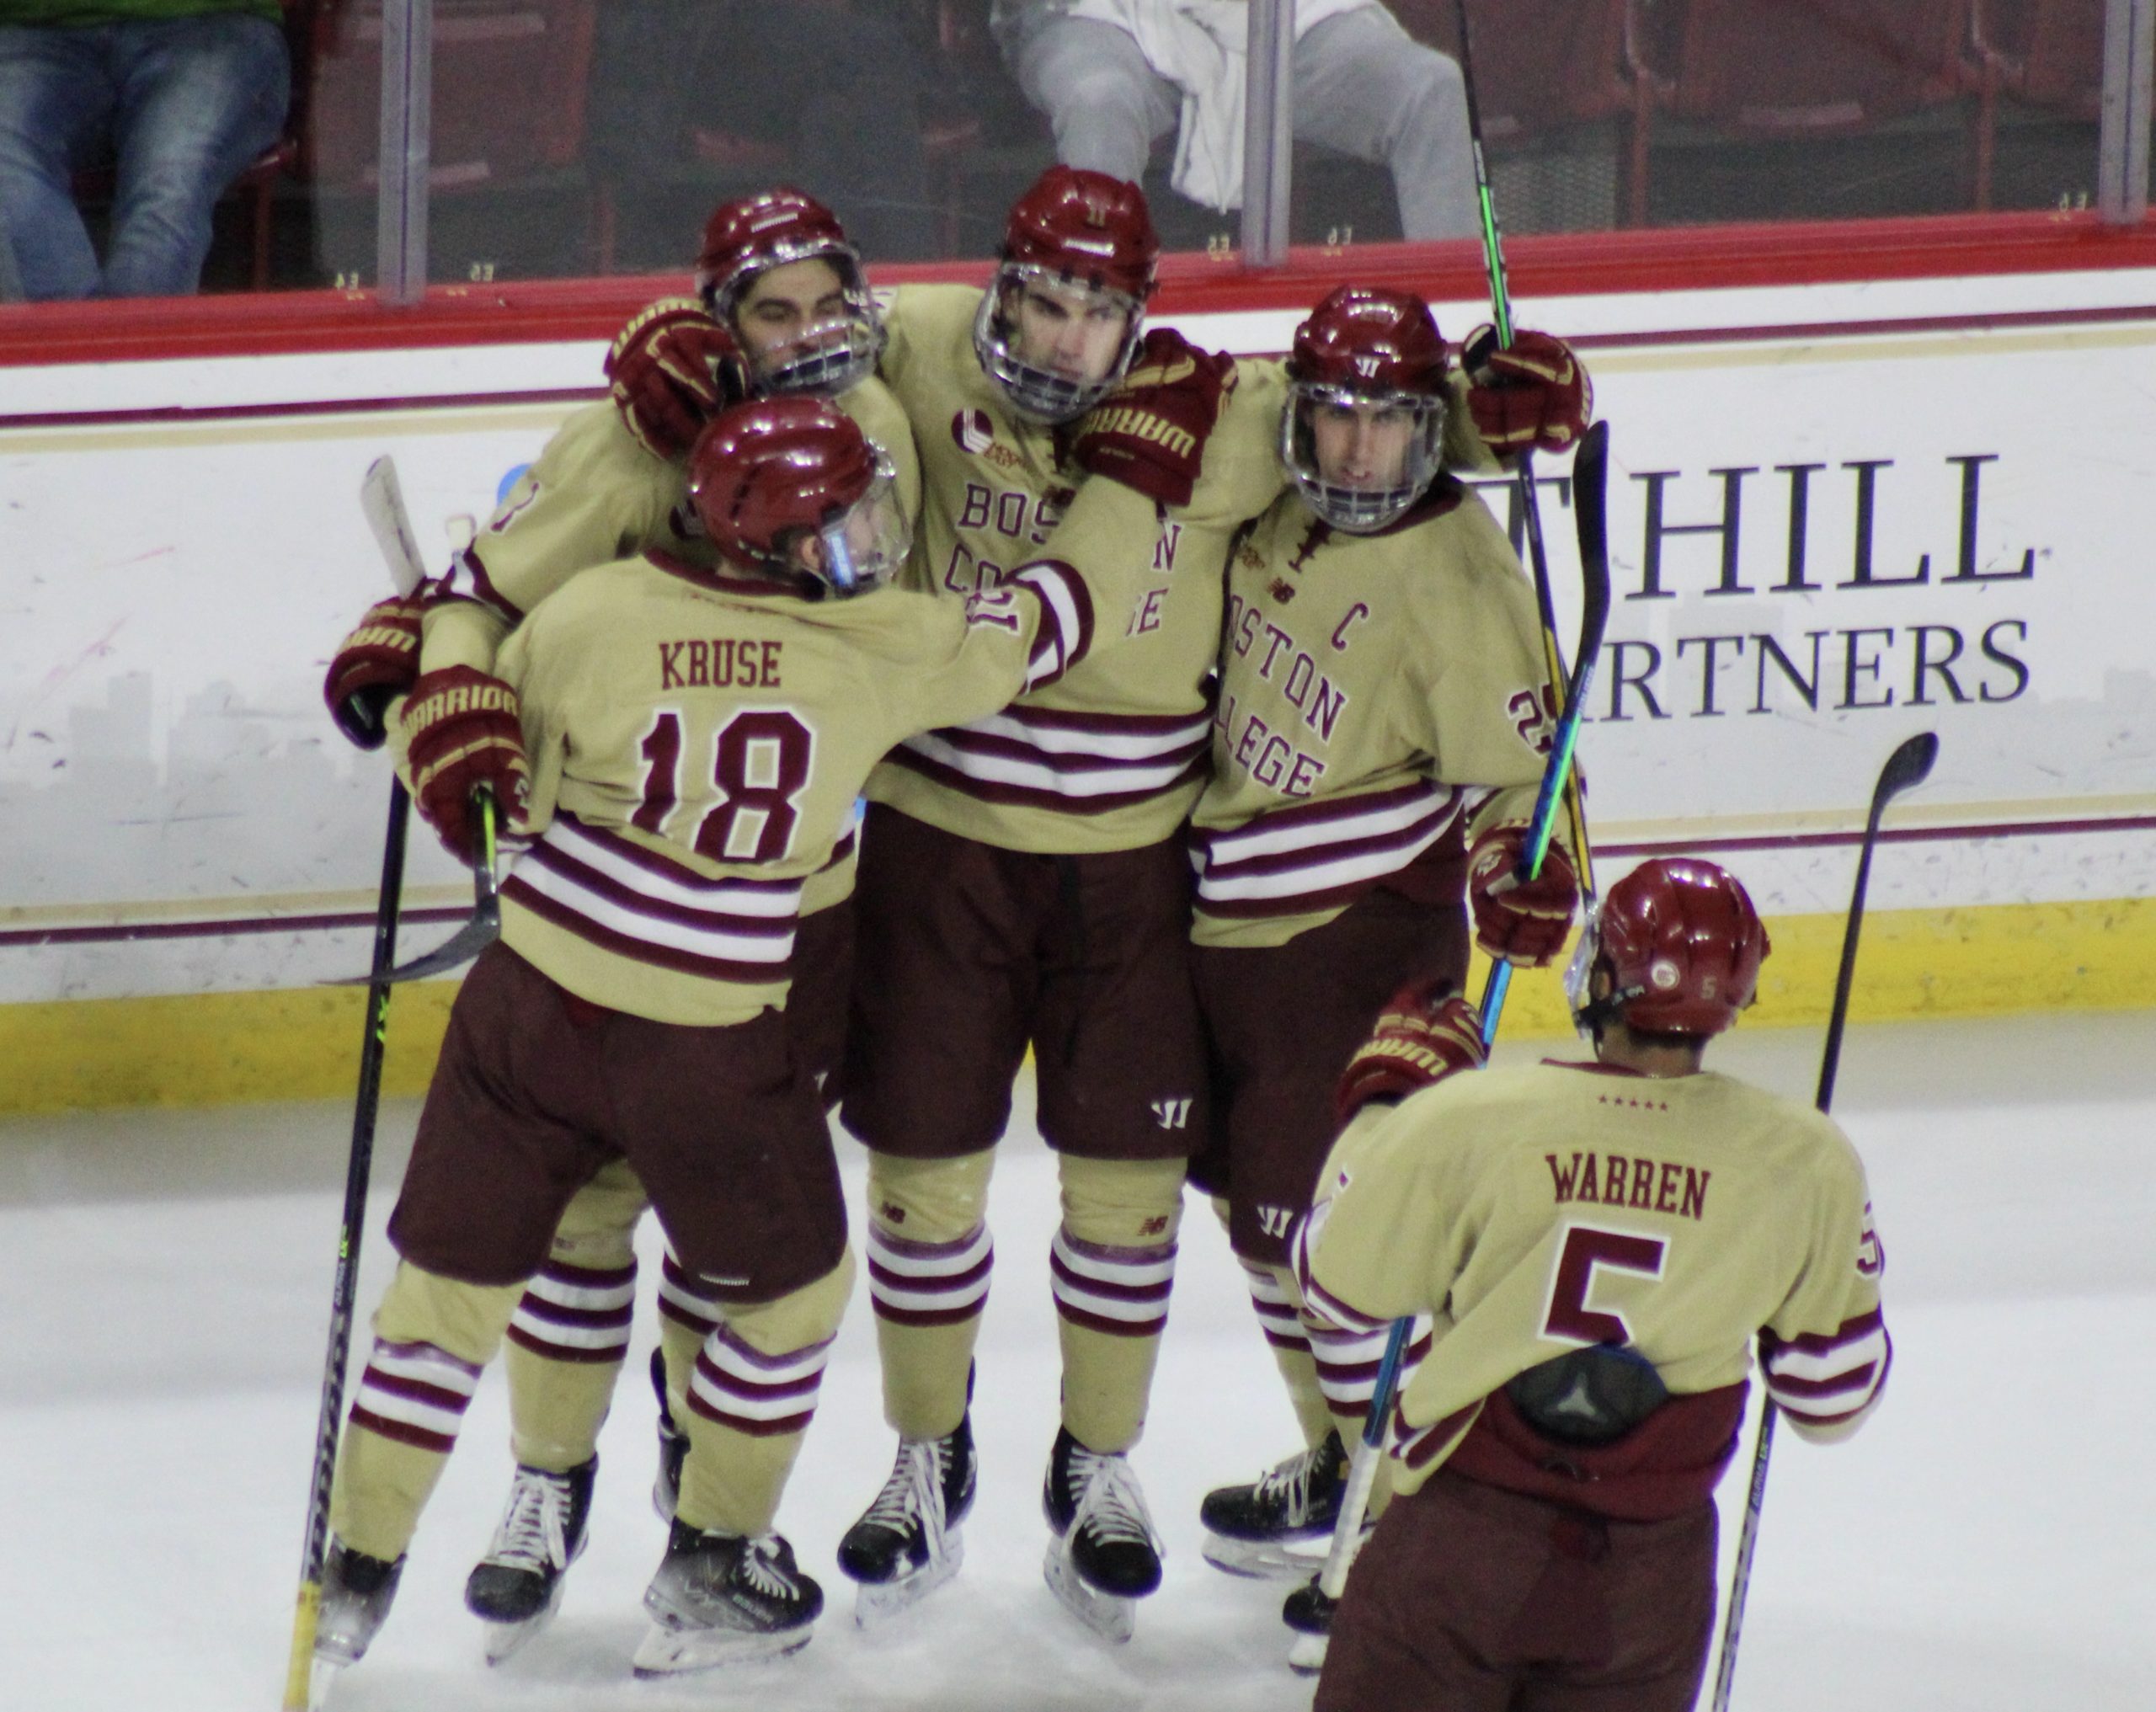 BC Outlasts UNH in OT